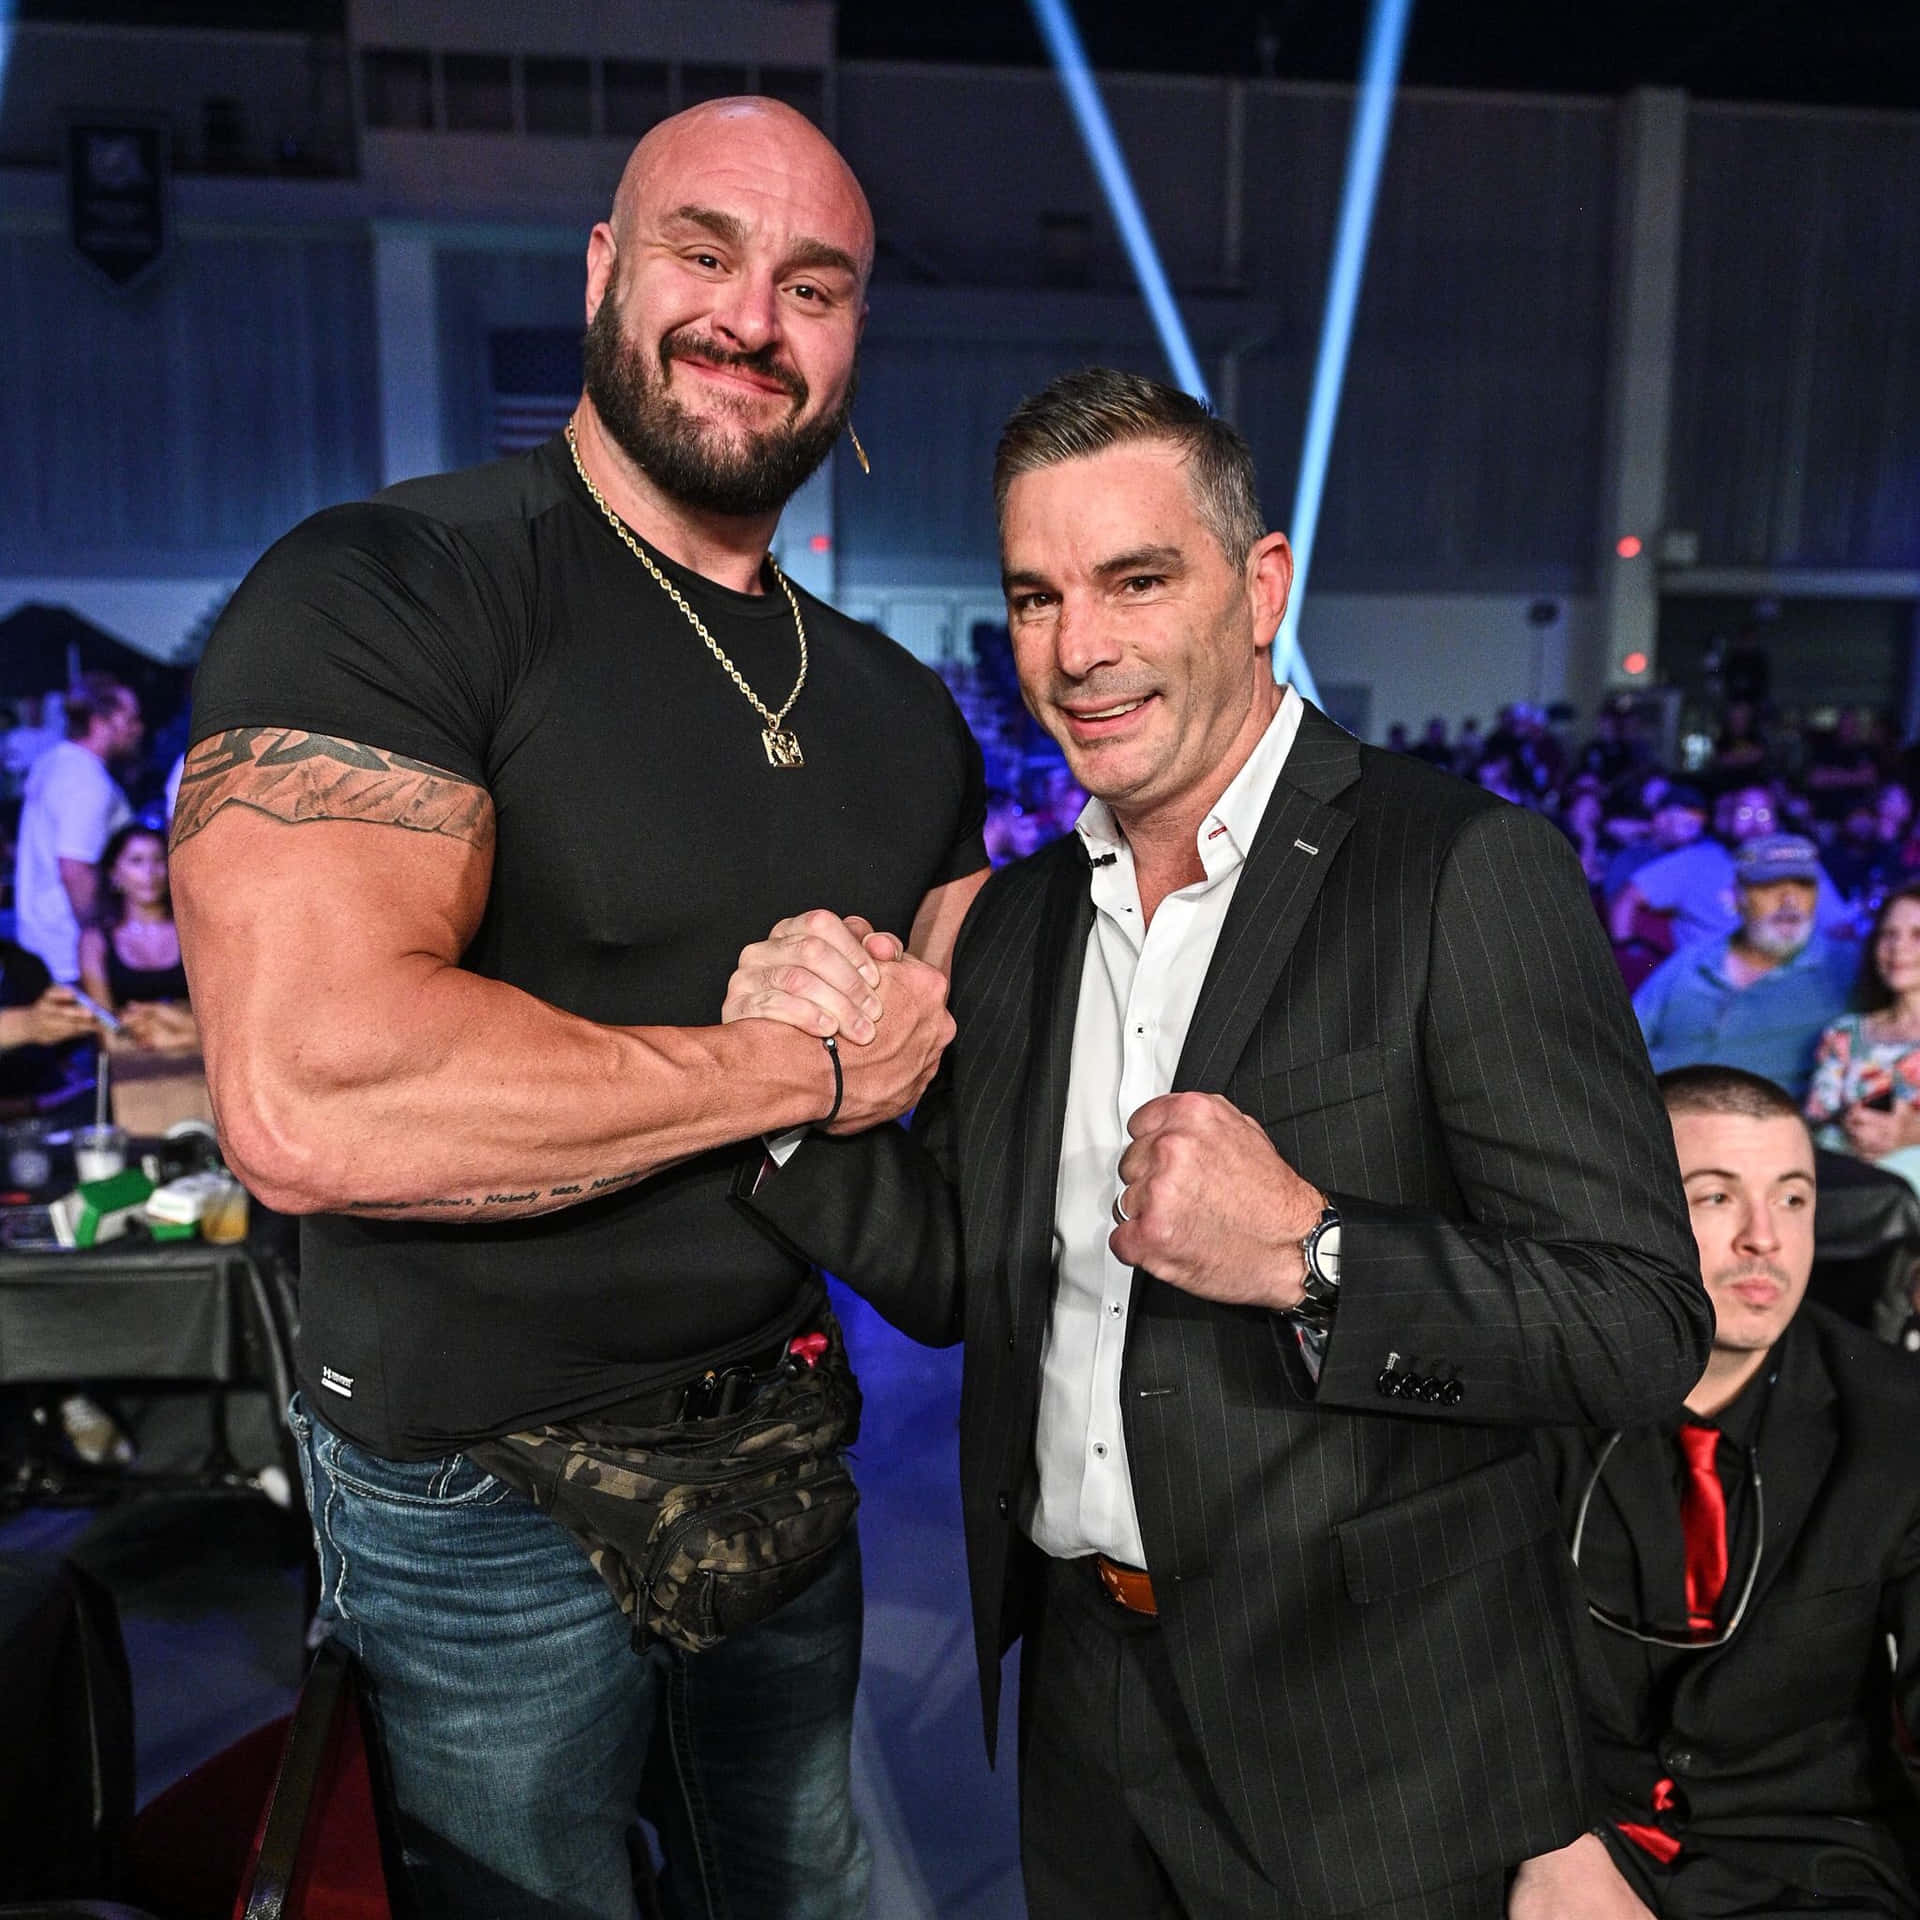 American Wrestler Braun Strowman Bare Knuckle 2021 Boxing Event Picture